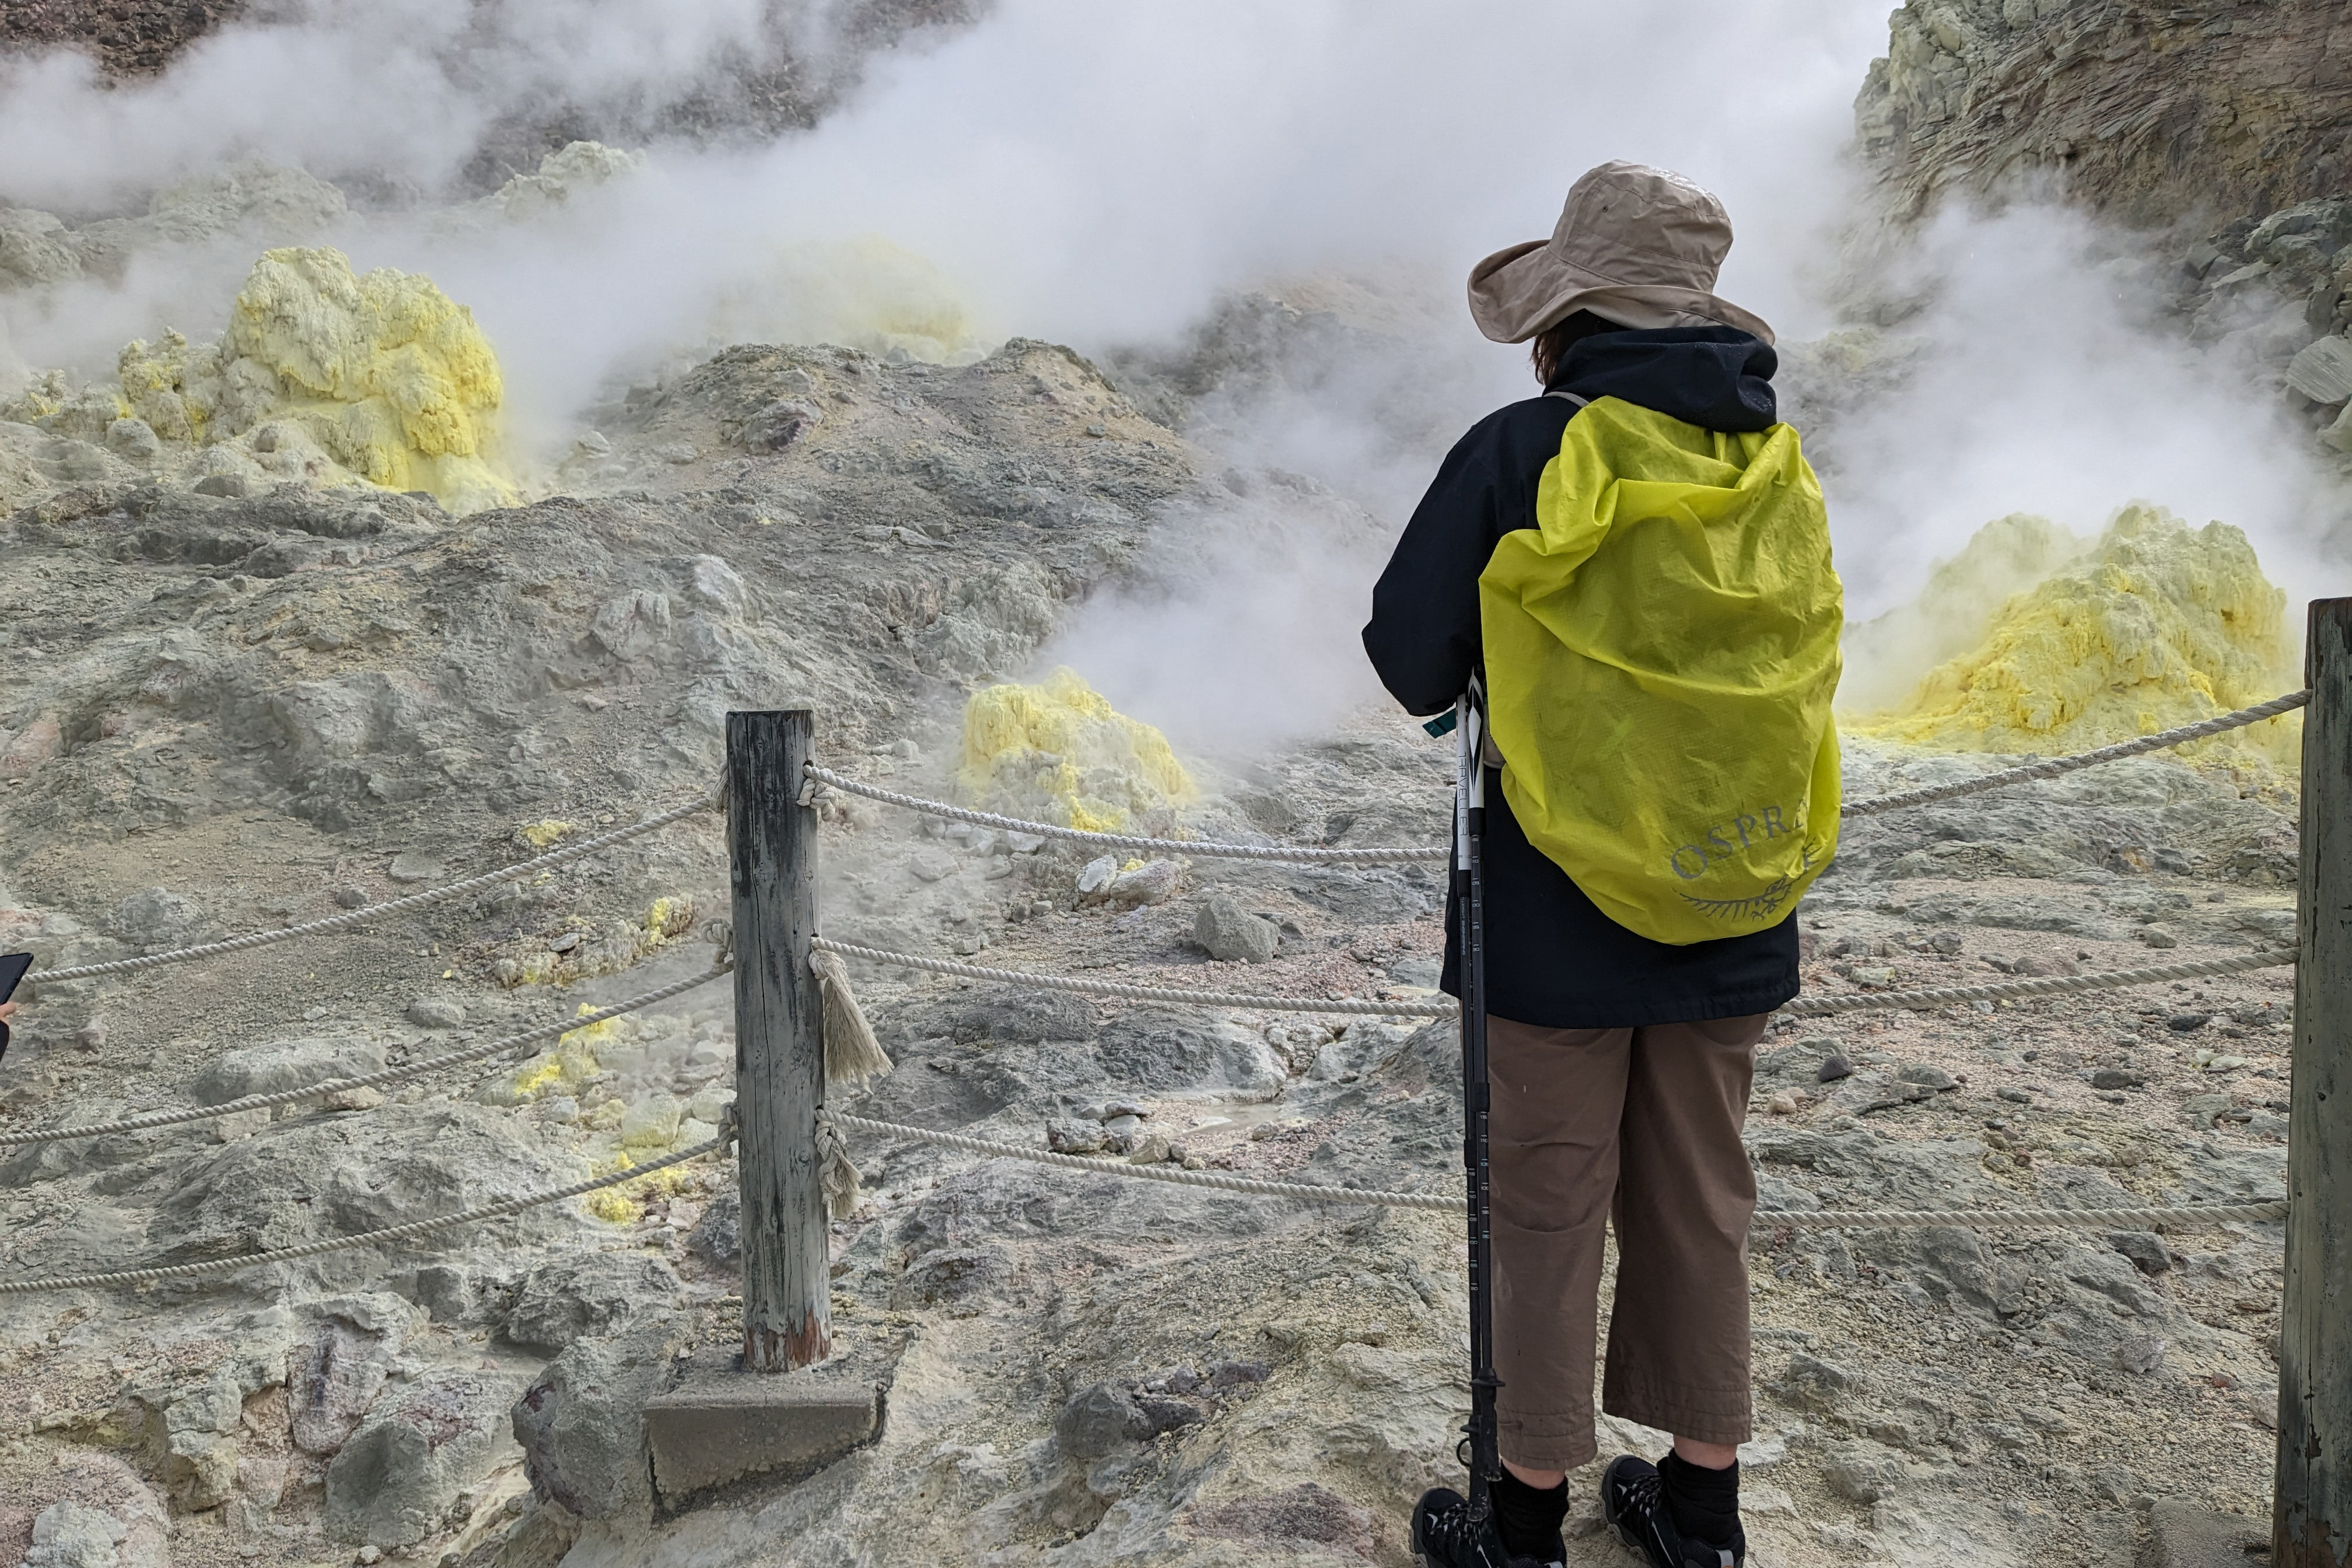 A tourist with a yellow pack cover stands in front of steaming volcanic vents that are coated in yellow sulpher